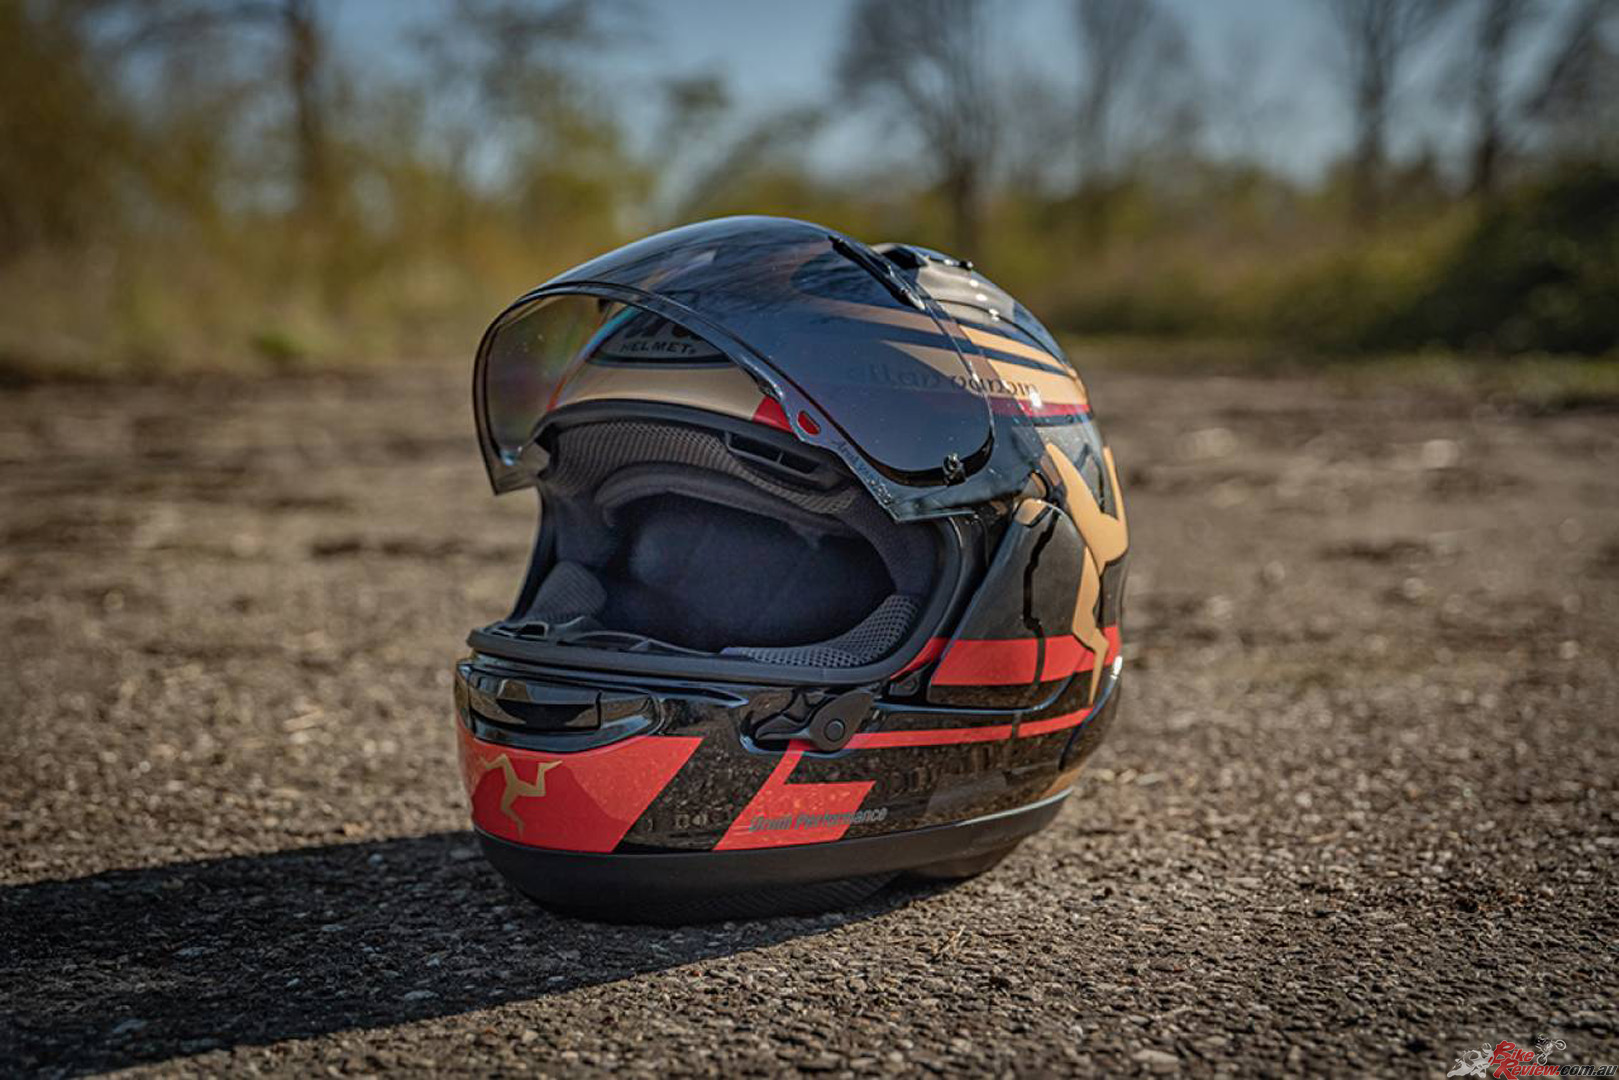 The RX-7V represents the summit of Arai’s knowledge, experience and know-how in helmet technology.